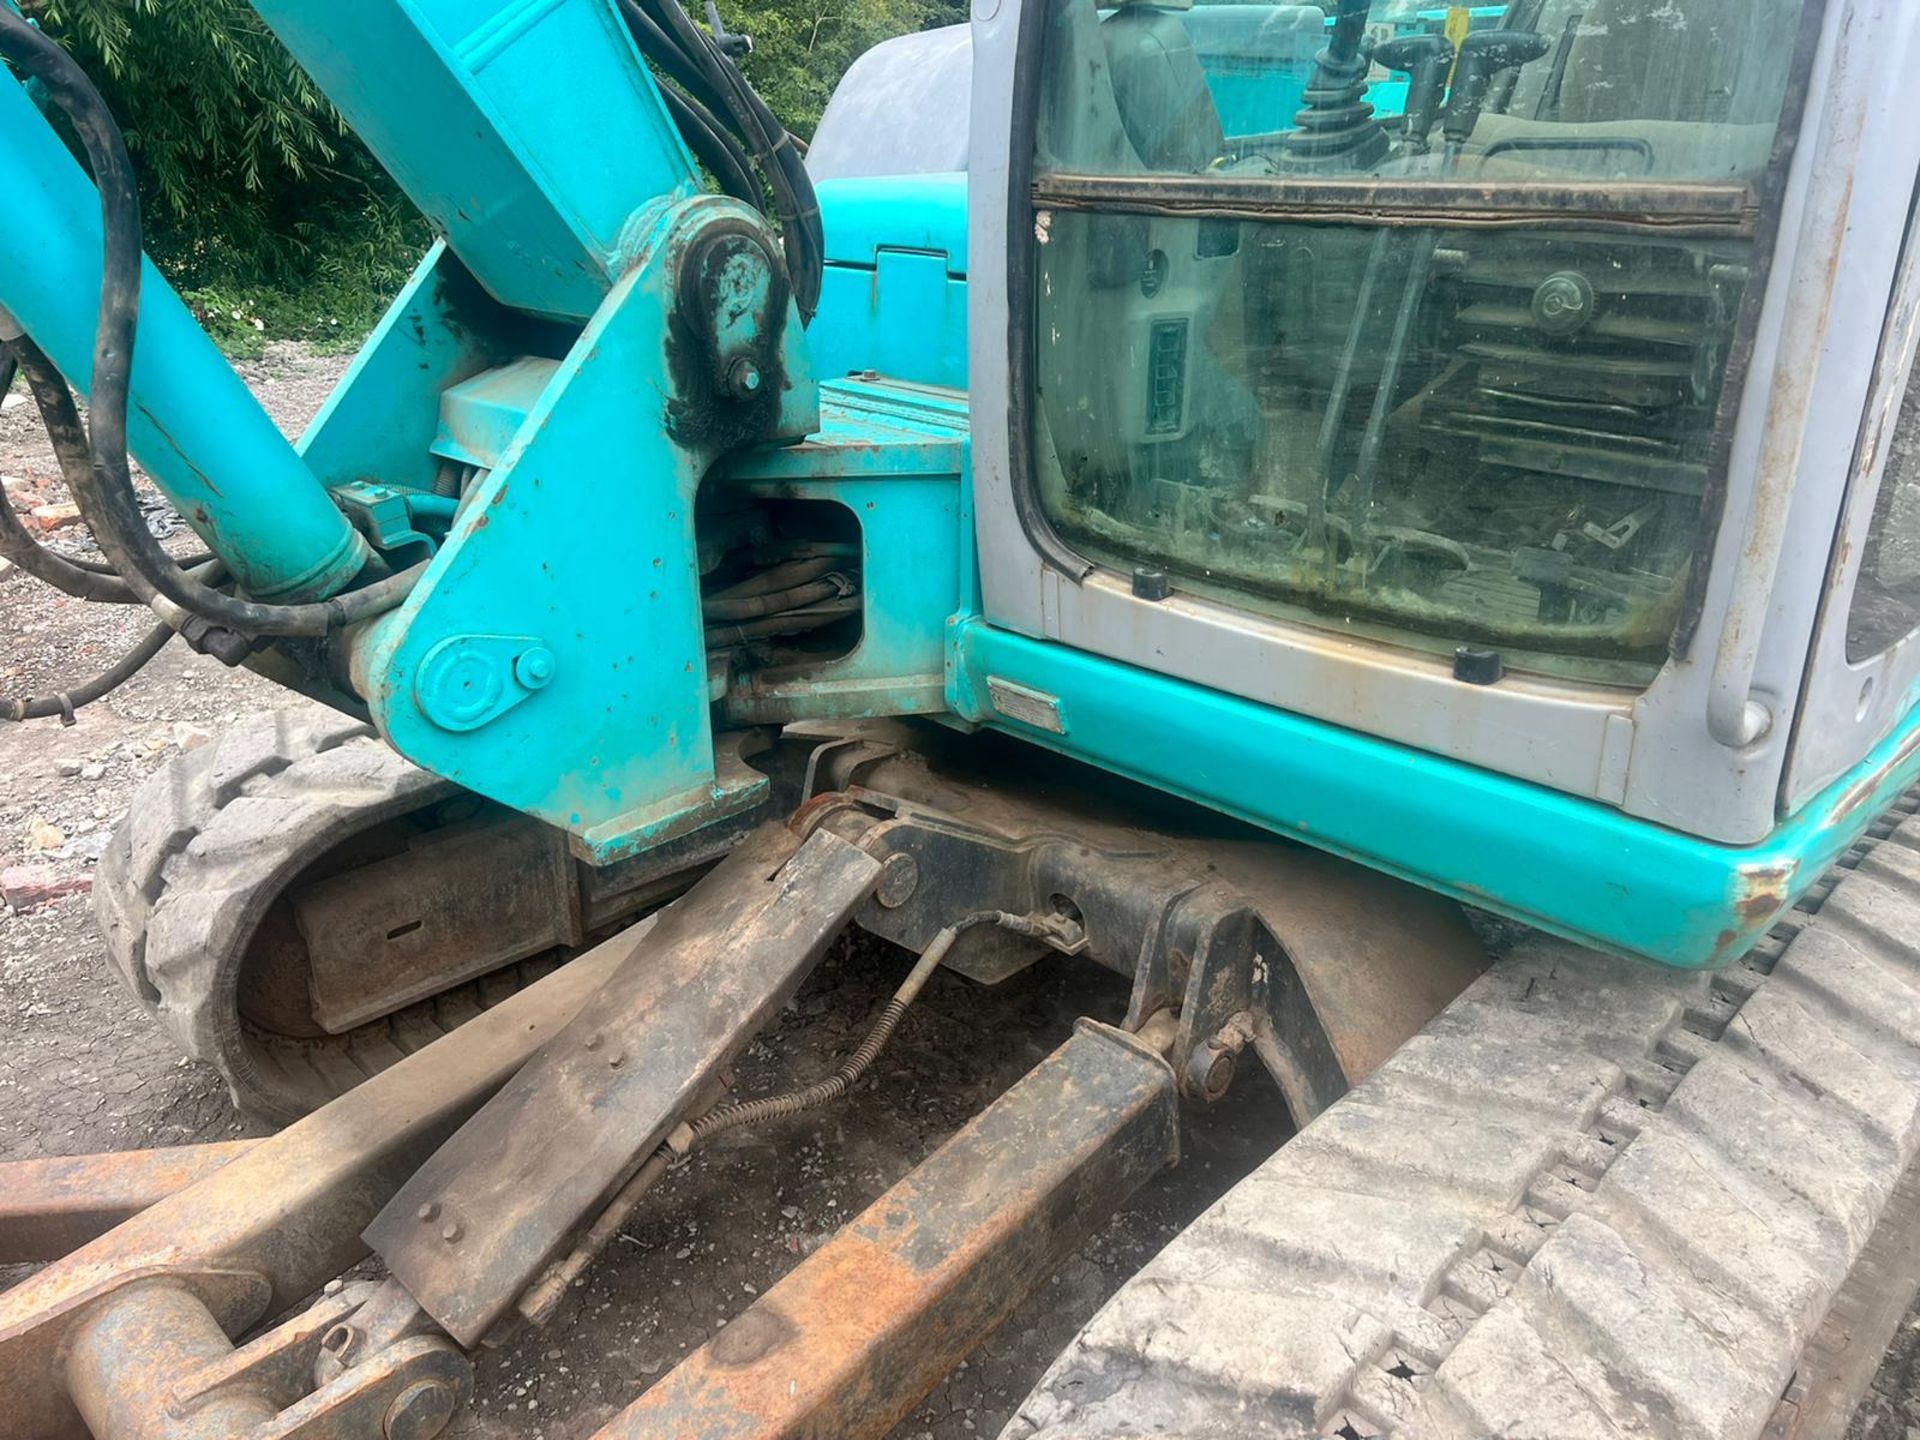 Kobelco 80MSR 8 Tonne Excavator With Blade, Runs Drives And Digs,Showing A Low 9117 Hours!*PLUS VAT* - Image 11 of 29